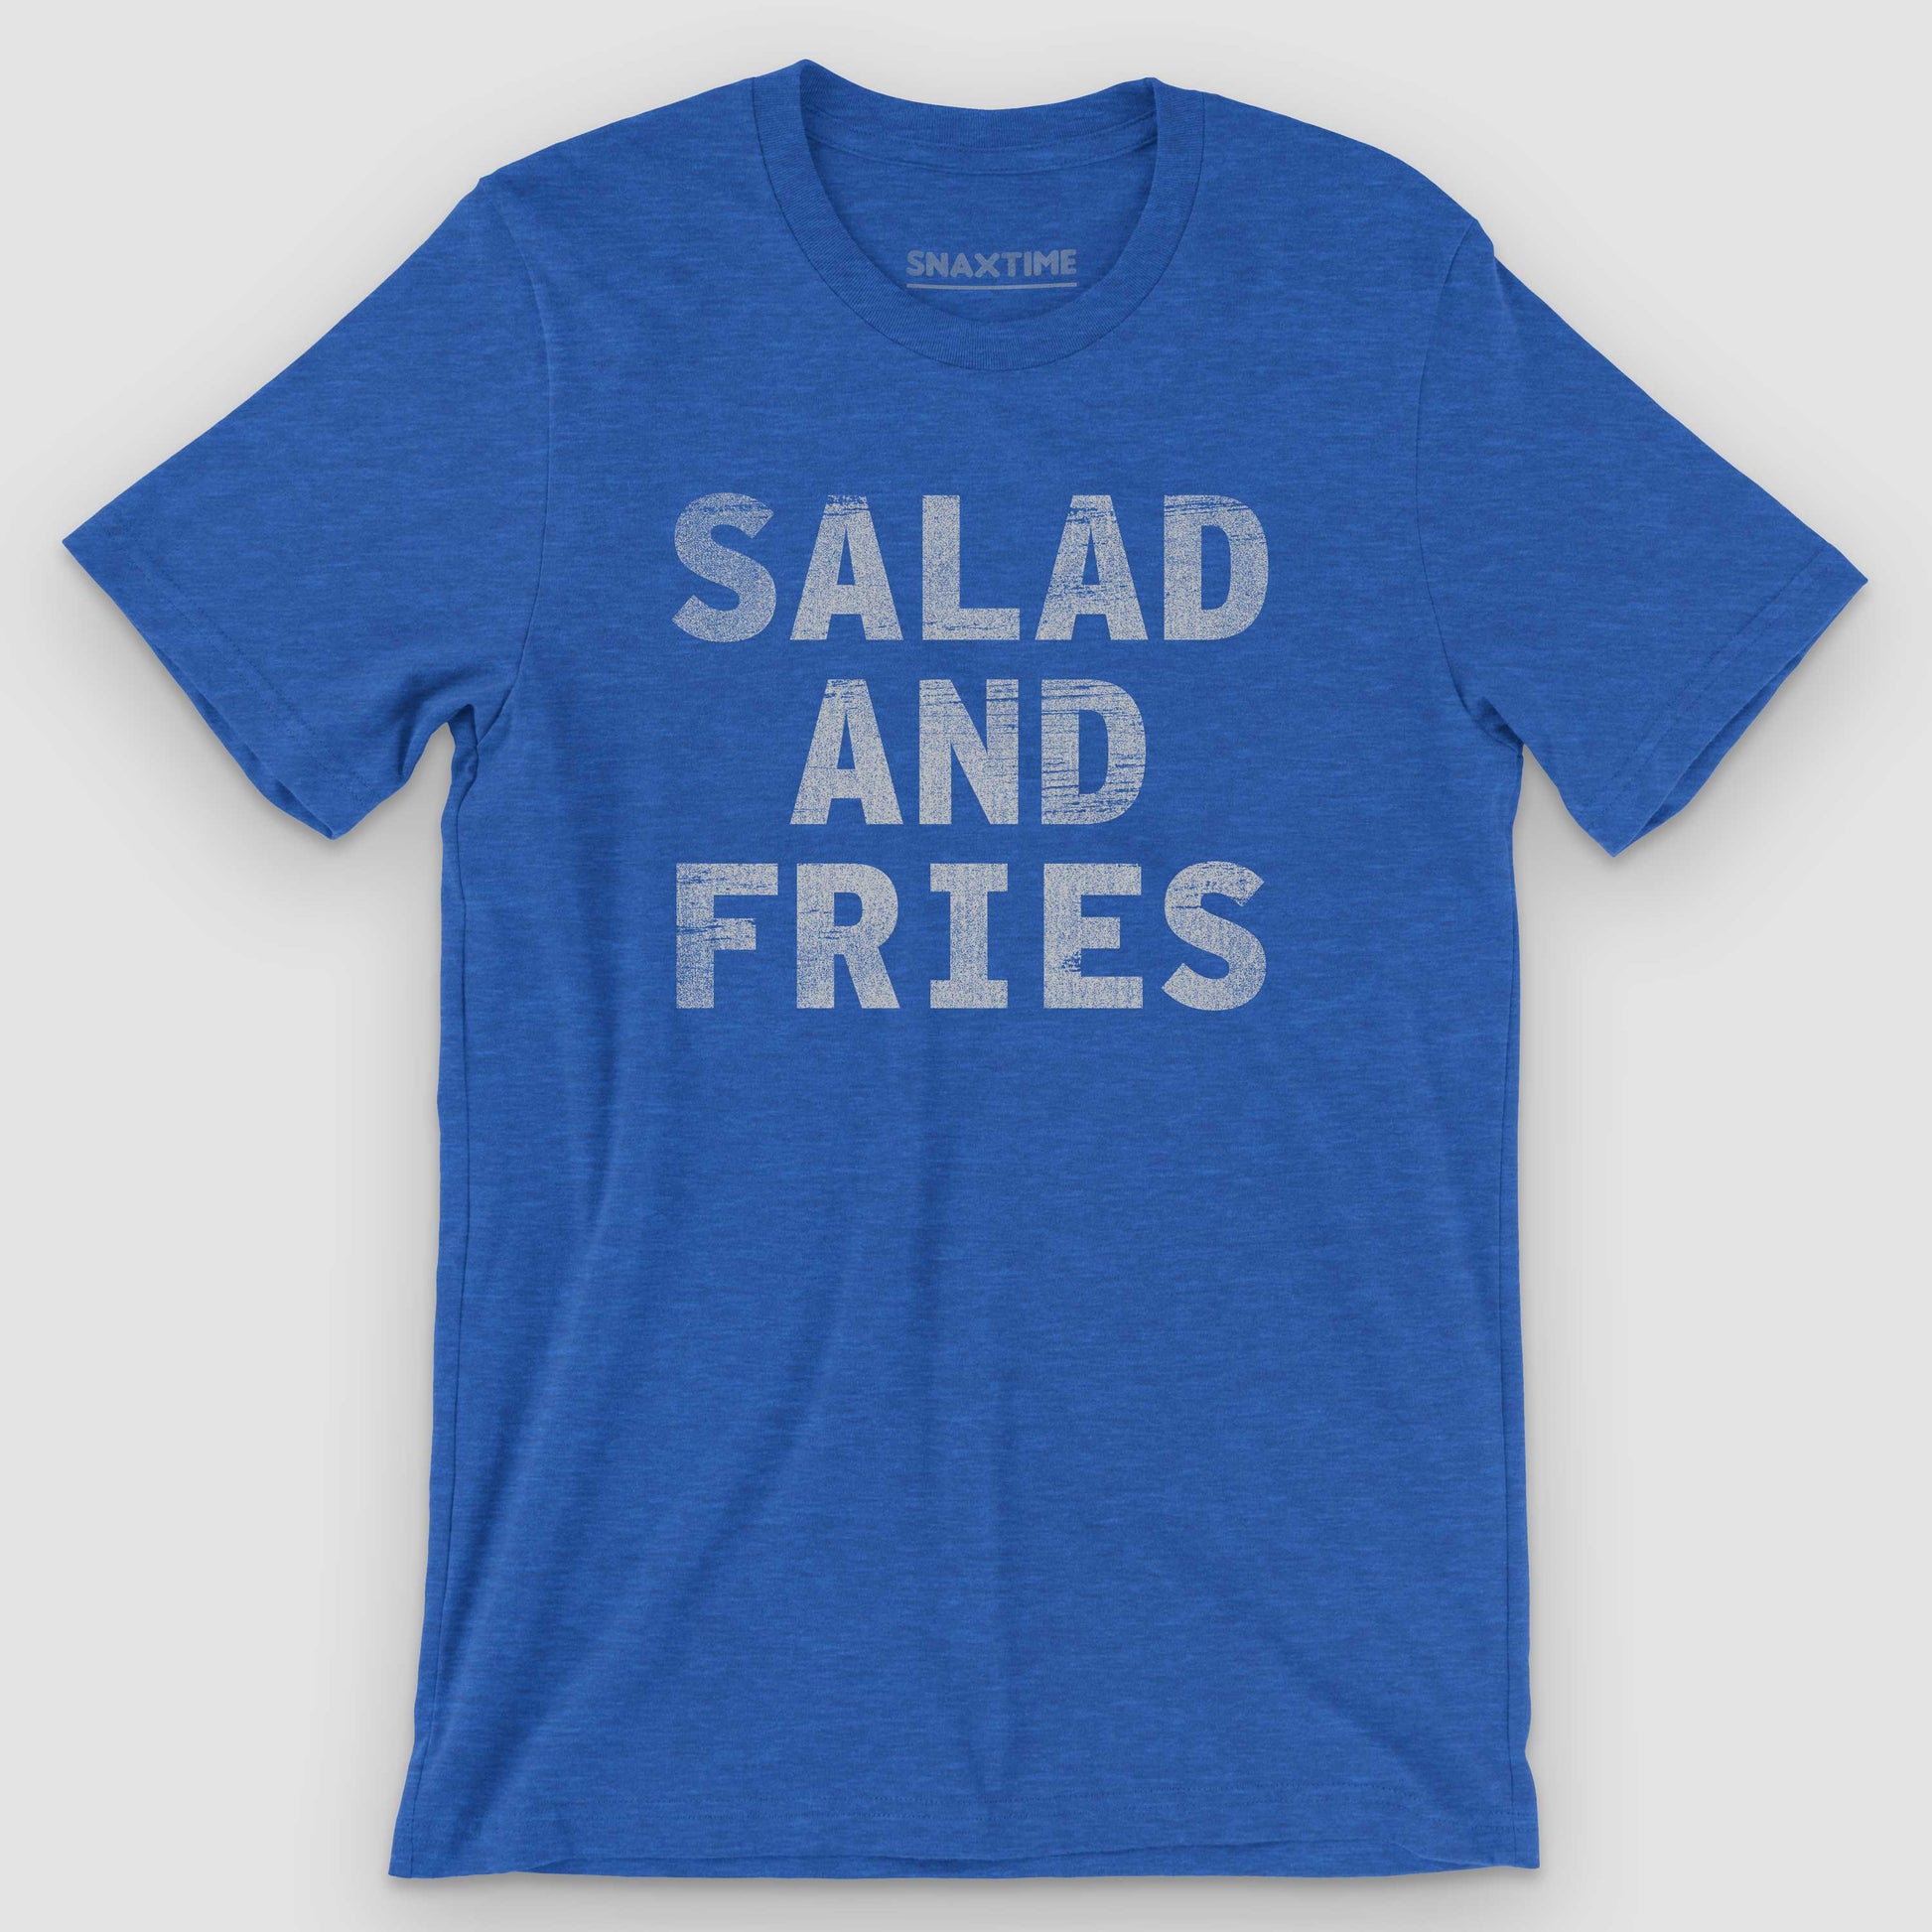 Heather True Royal Salad and Fries Graphic T-Shirt by Snaxtime